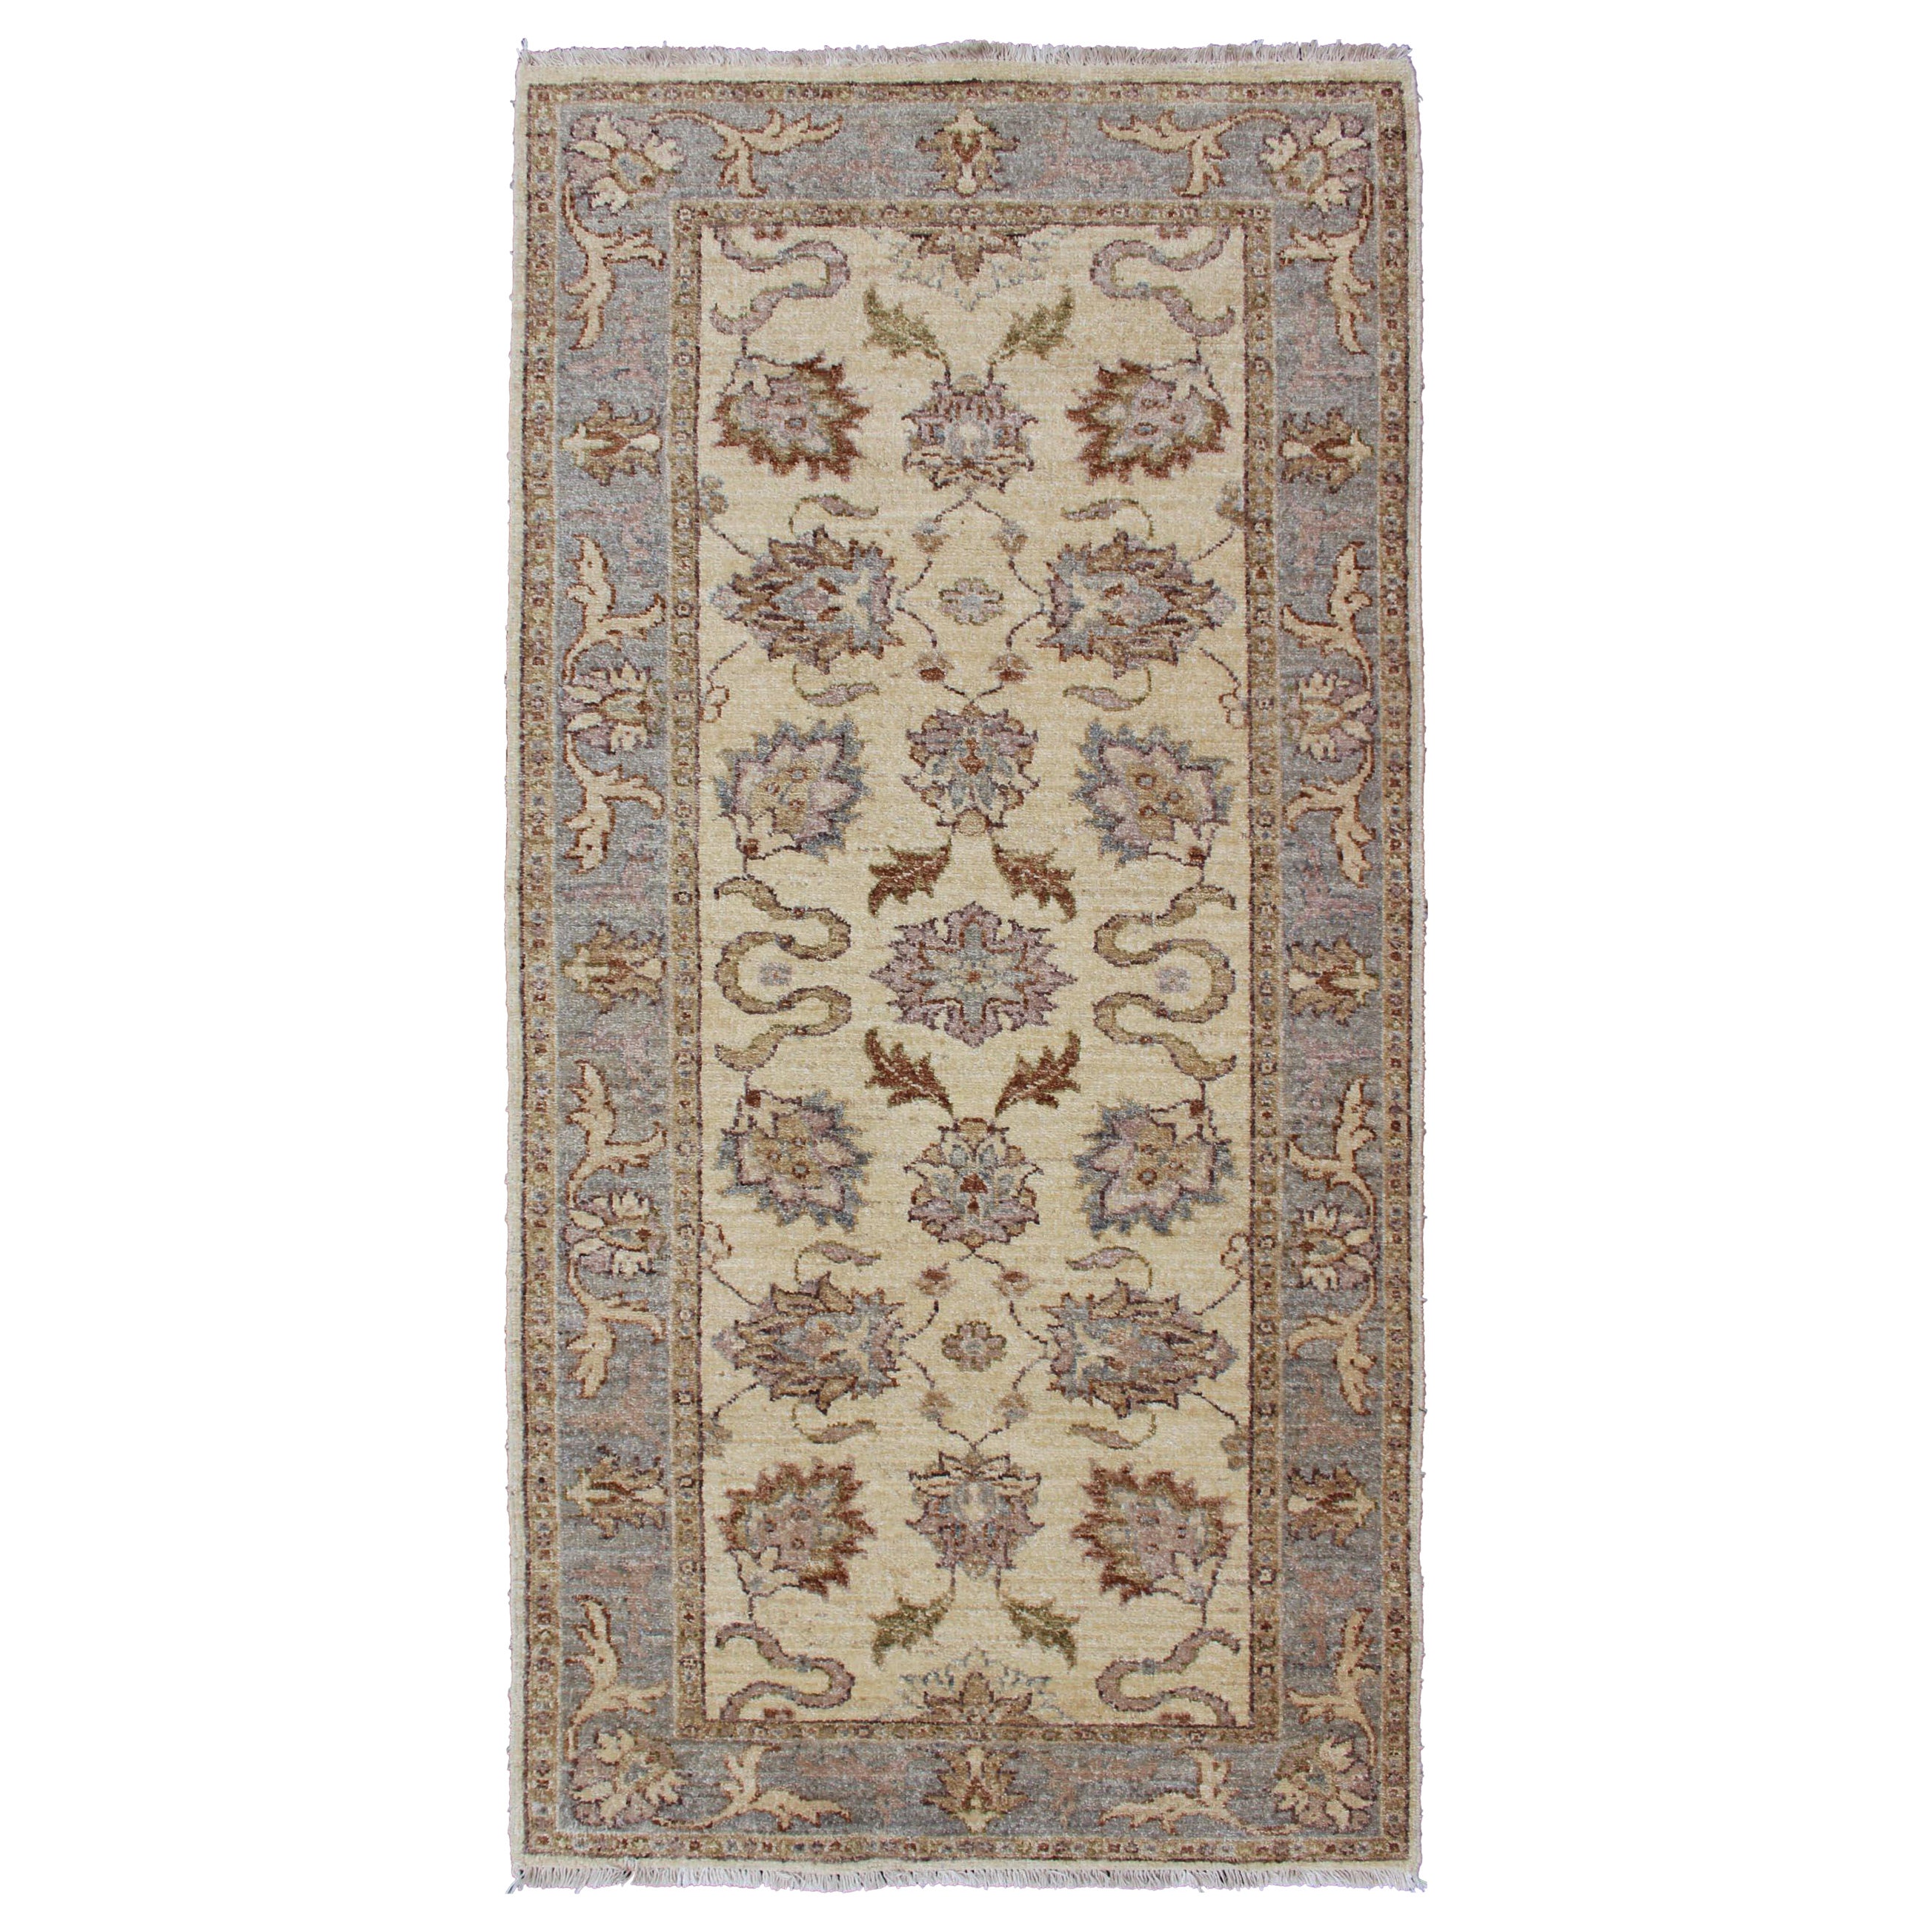 Modern Afghan Floral Pattern Short Runner in Earth Tones with Browns and Cream